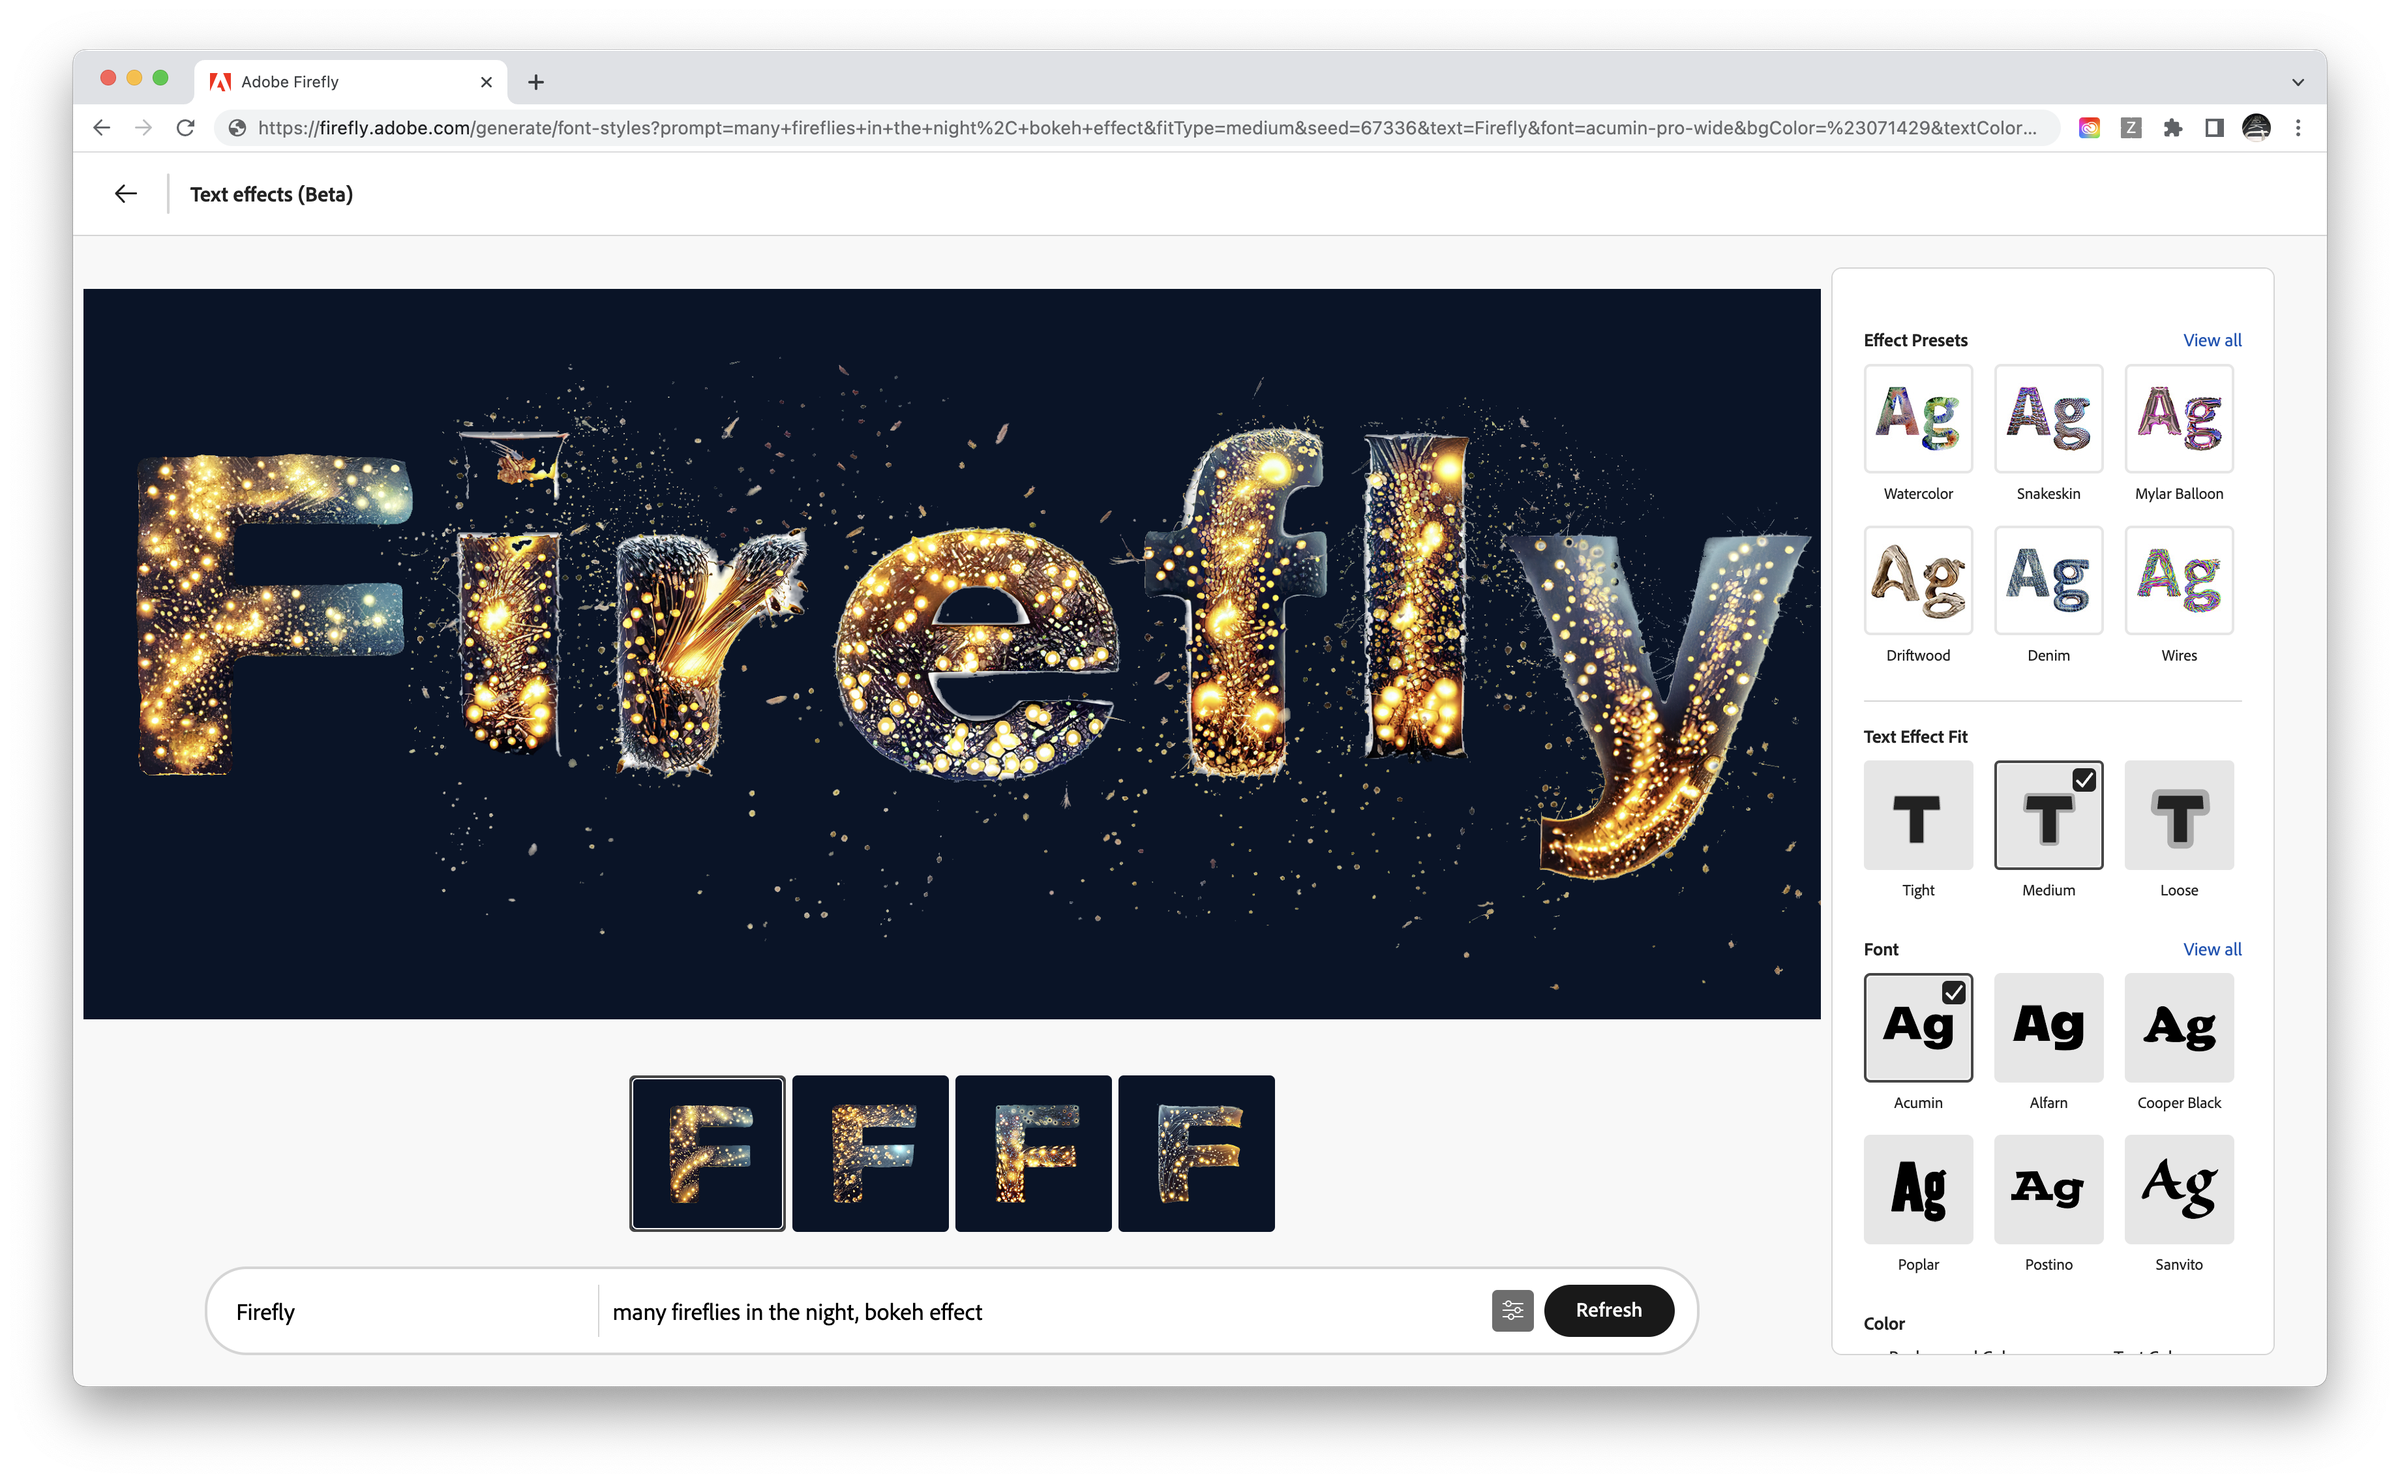 The word “Firefly” transformed to appear as though the letters are glass illuminated by glowing yellow fireflies.